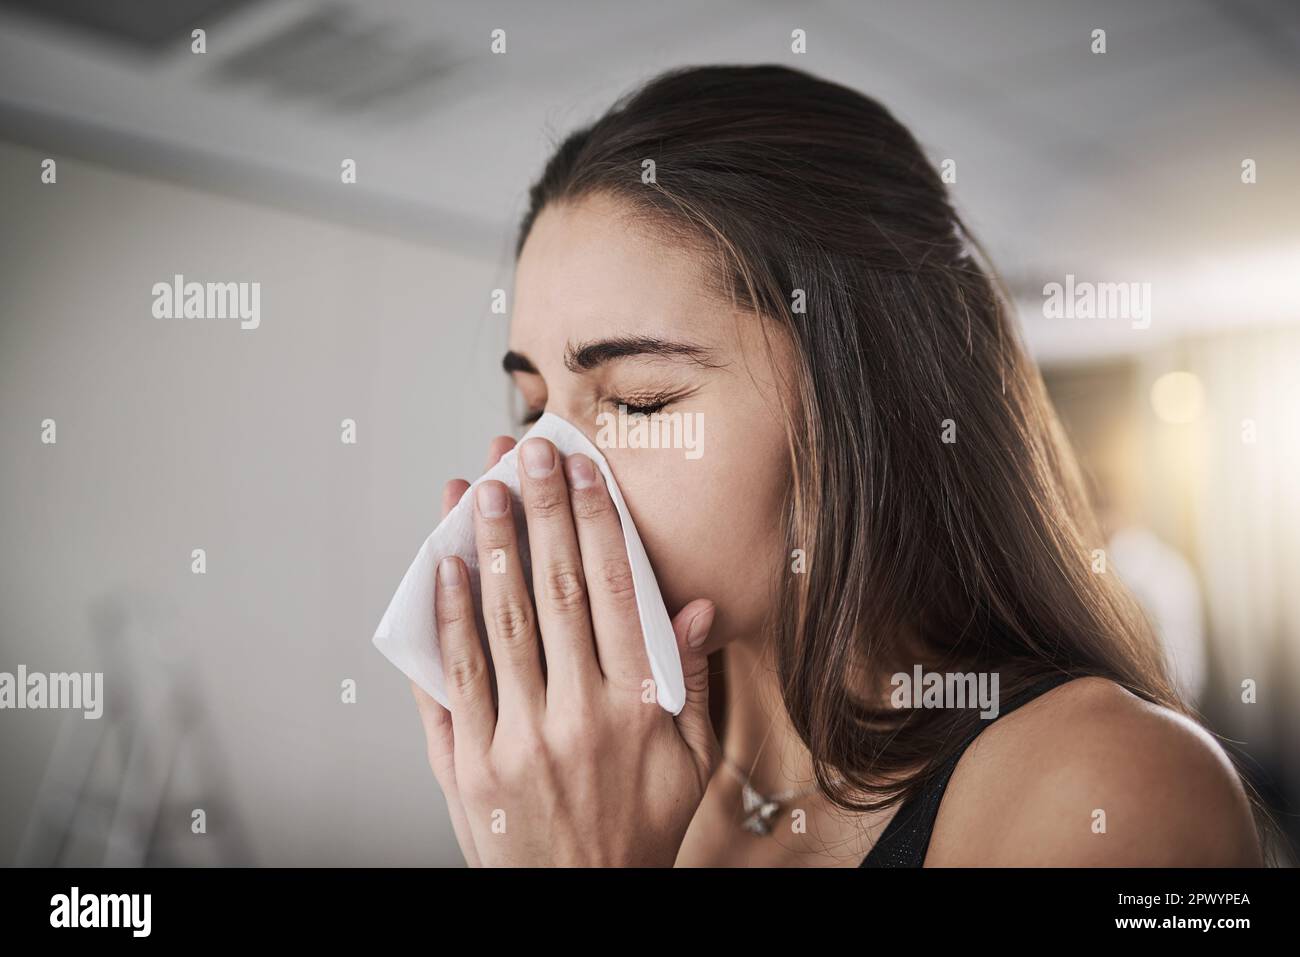 Flu seasons coming knocking. a young woman blowing her nose Stock Photo